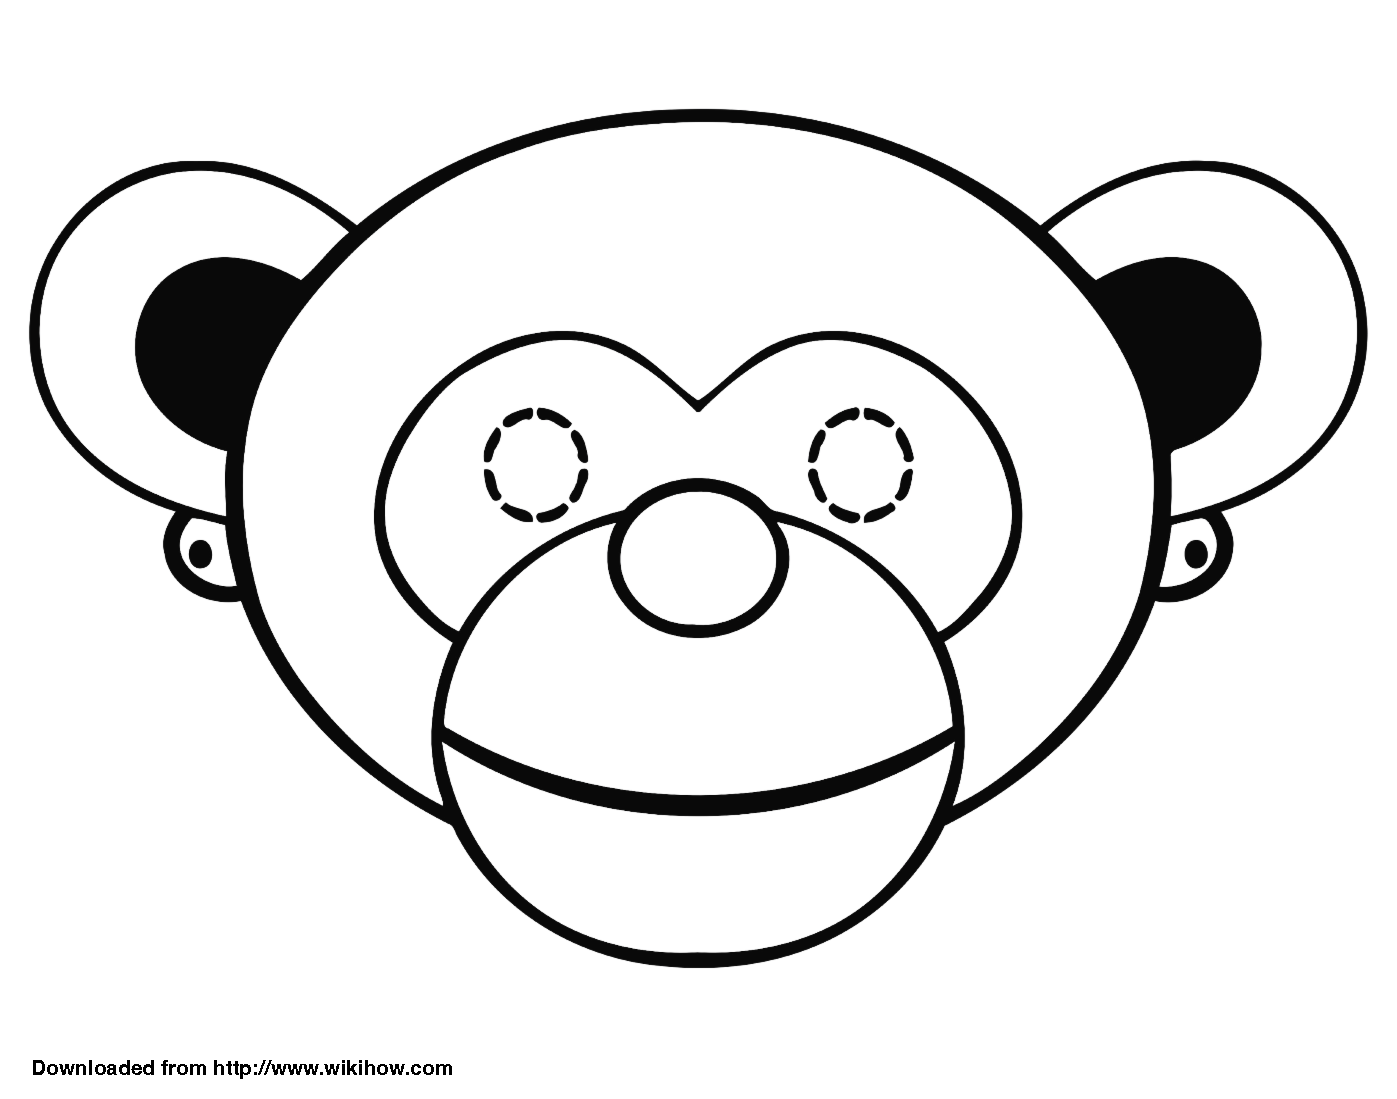 How to Make a Monkey Mask: 13 Steps (with Pictures) - wikiHow